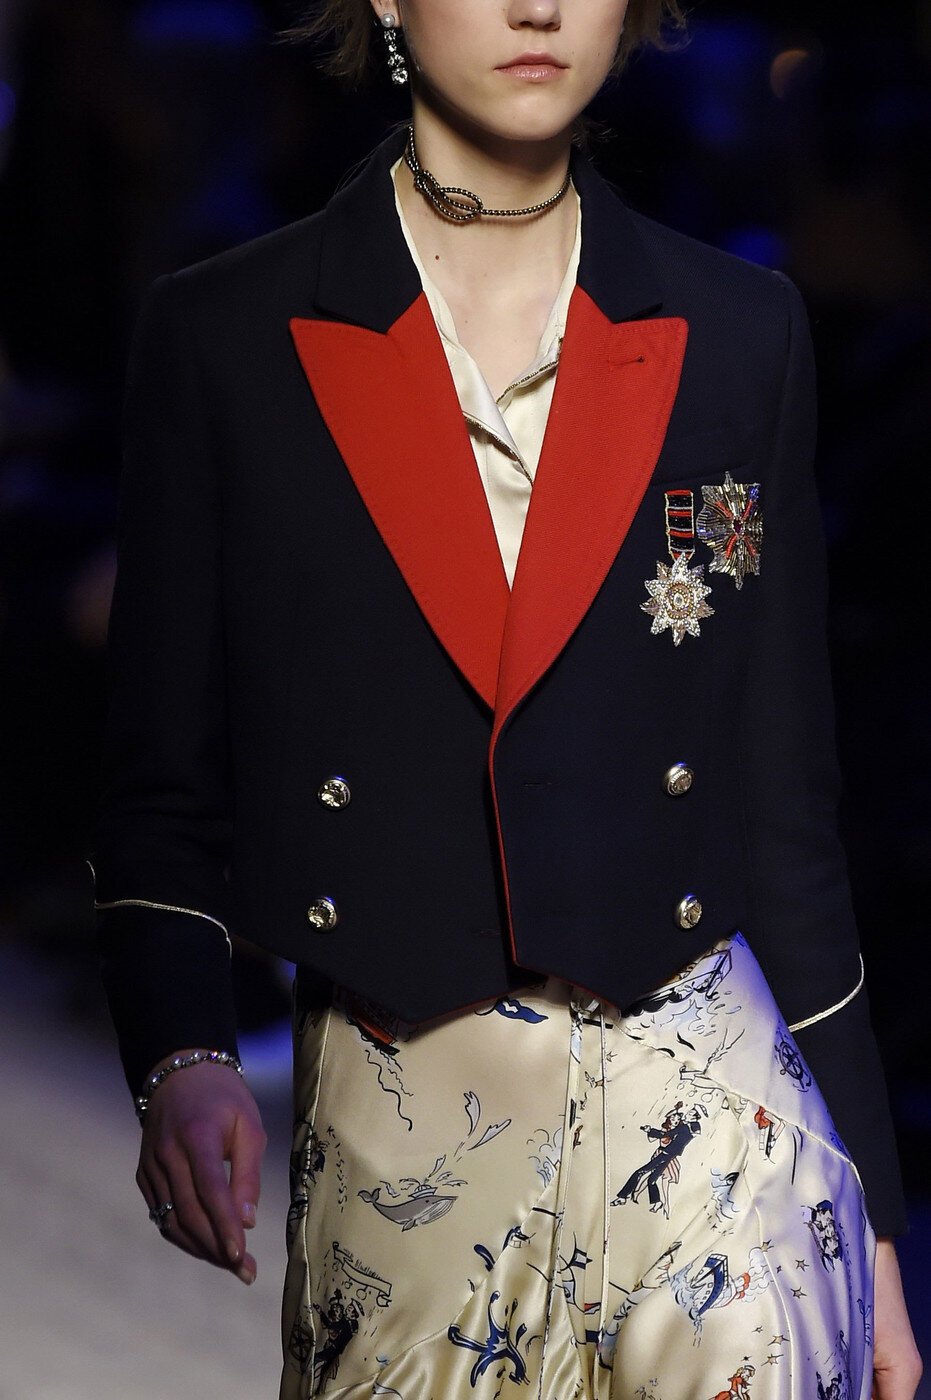 Tommy Hilfiger Double Breasted Cropped Jacket in Navy with Red Lapels.jpg